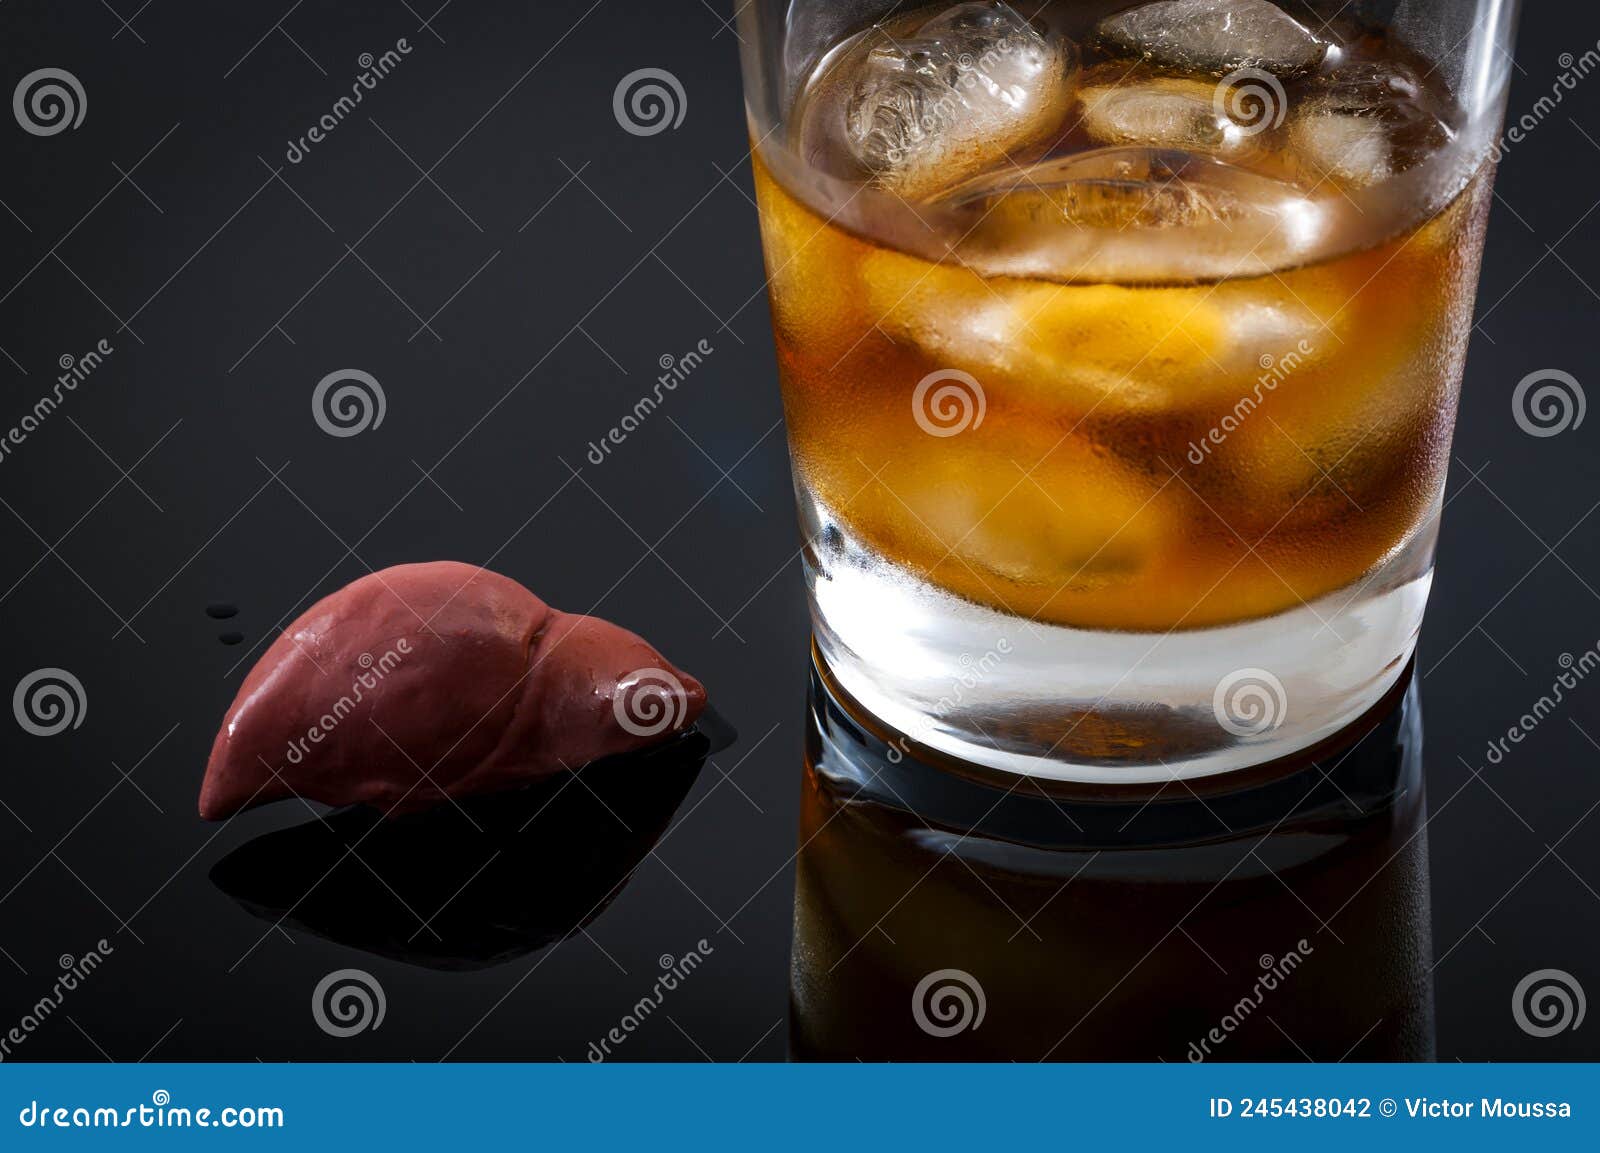 alcoholic liver damage and cirrhosis concept with a liver next to a glass of alcohol. cirrhosis is most commonly caused by